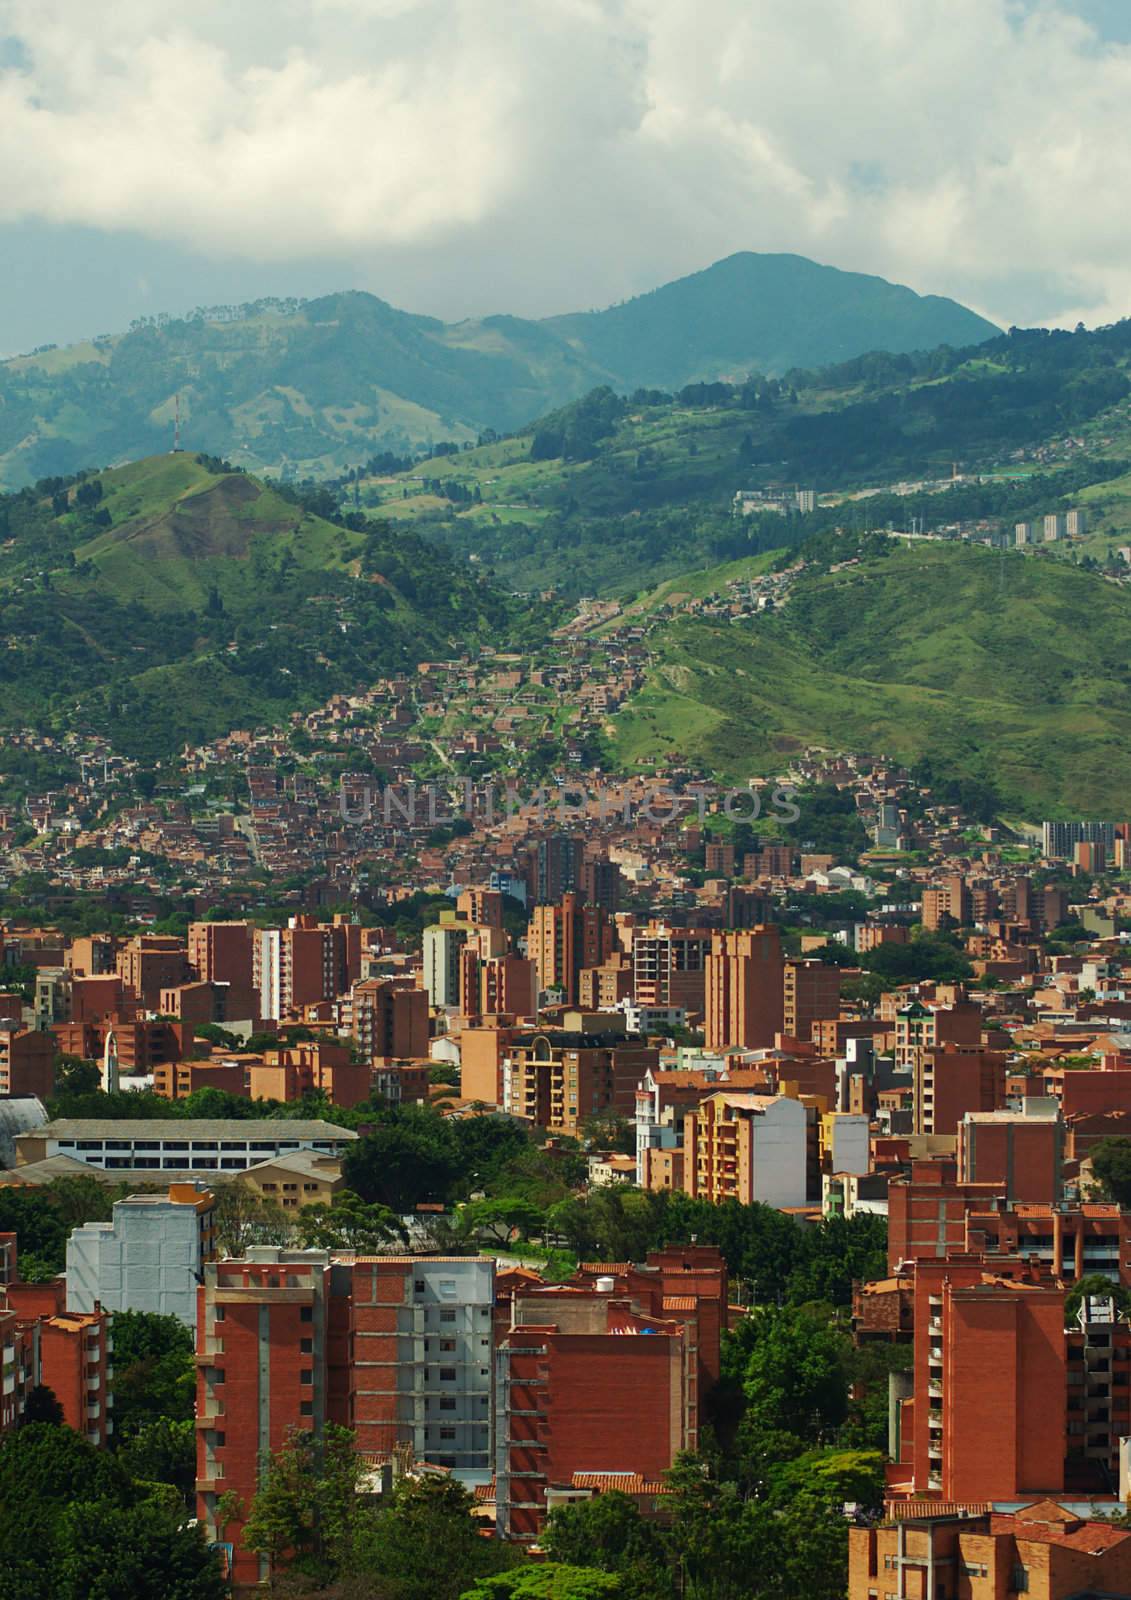 Medellin, the second biggest city in Colombia, which is the capital of the Department of Antioquia